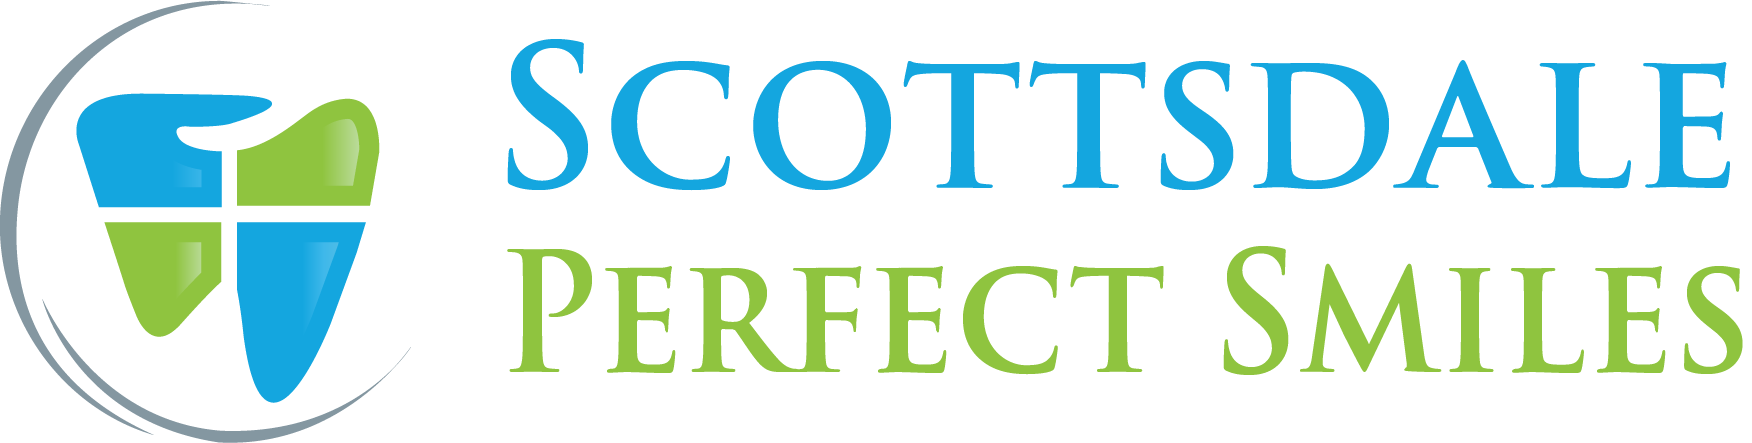 Scottsdale-Perfect-Smiles-Logo-Victor-Moreira.png